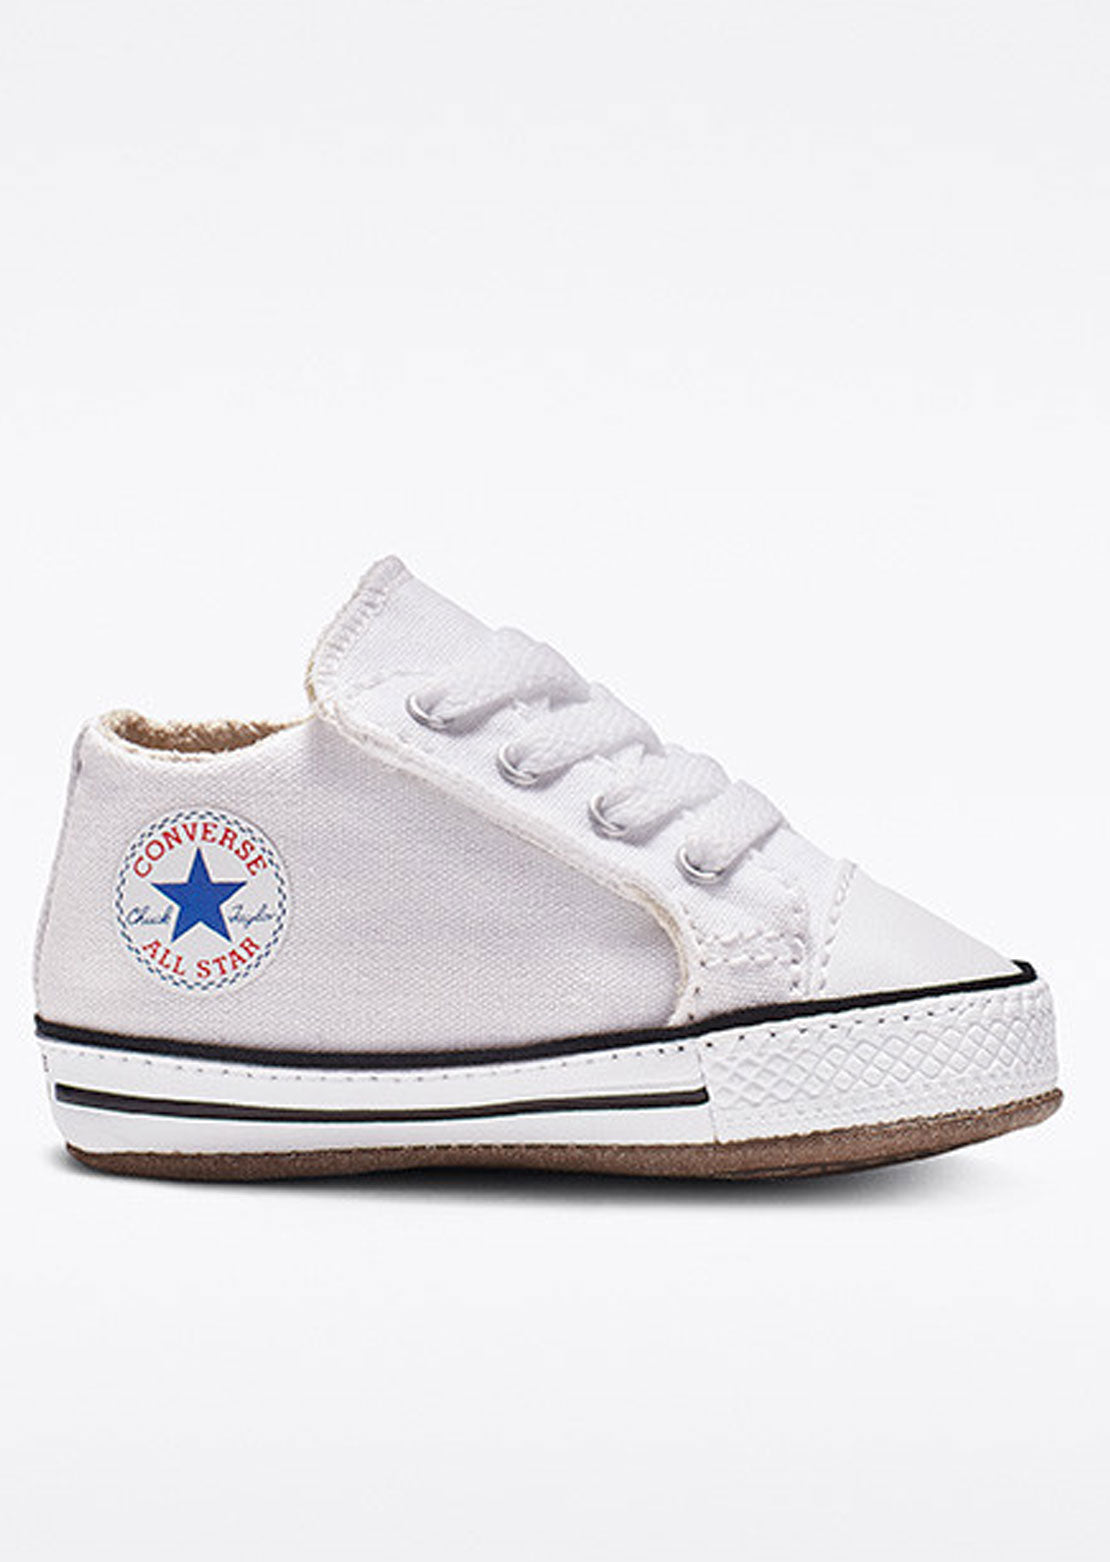 Converse Junior Infant Chuck Taylor All Star Cribster Canvas Shoes White/Natural Ivory/White